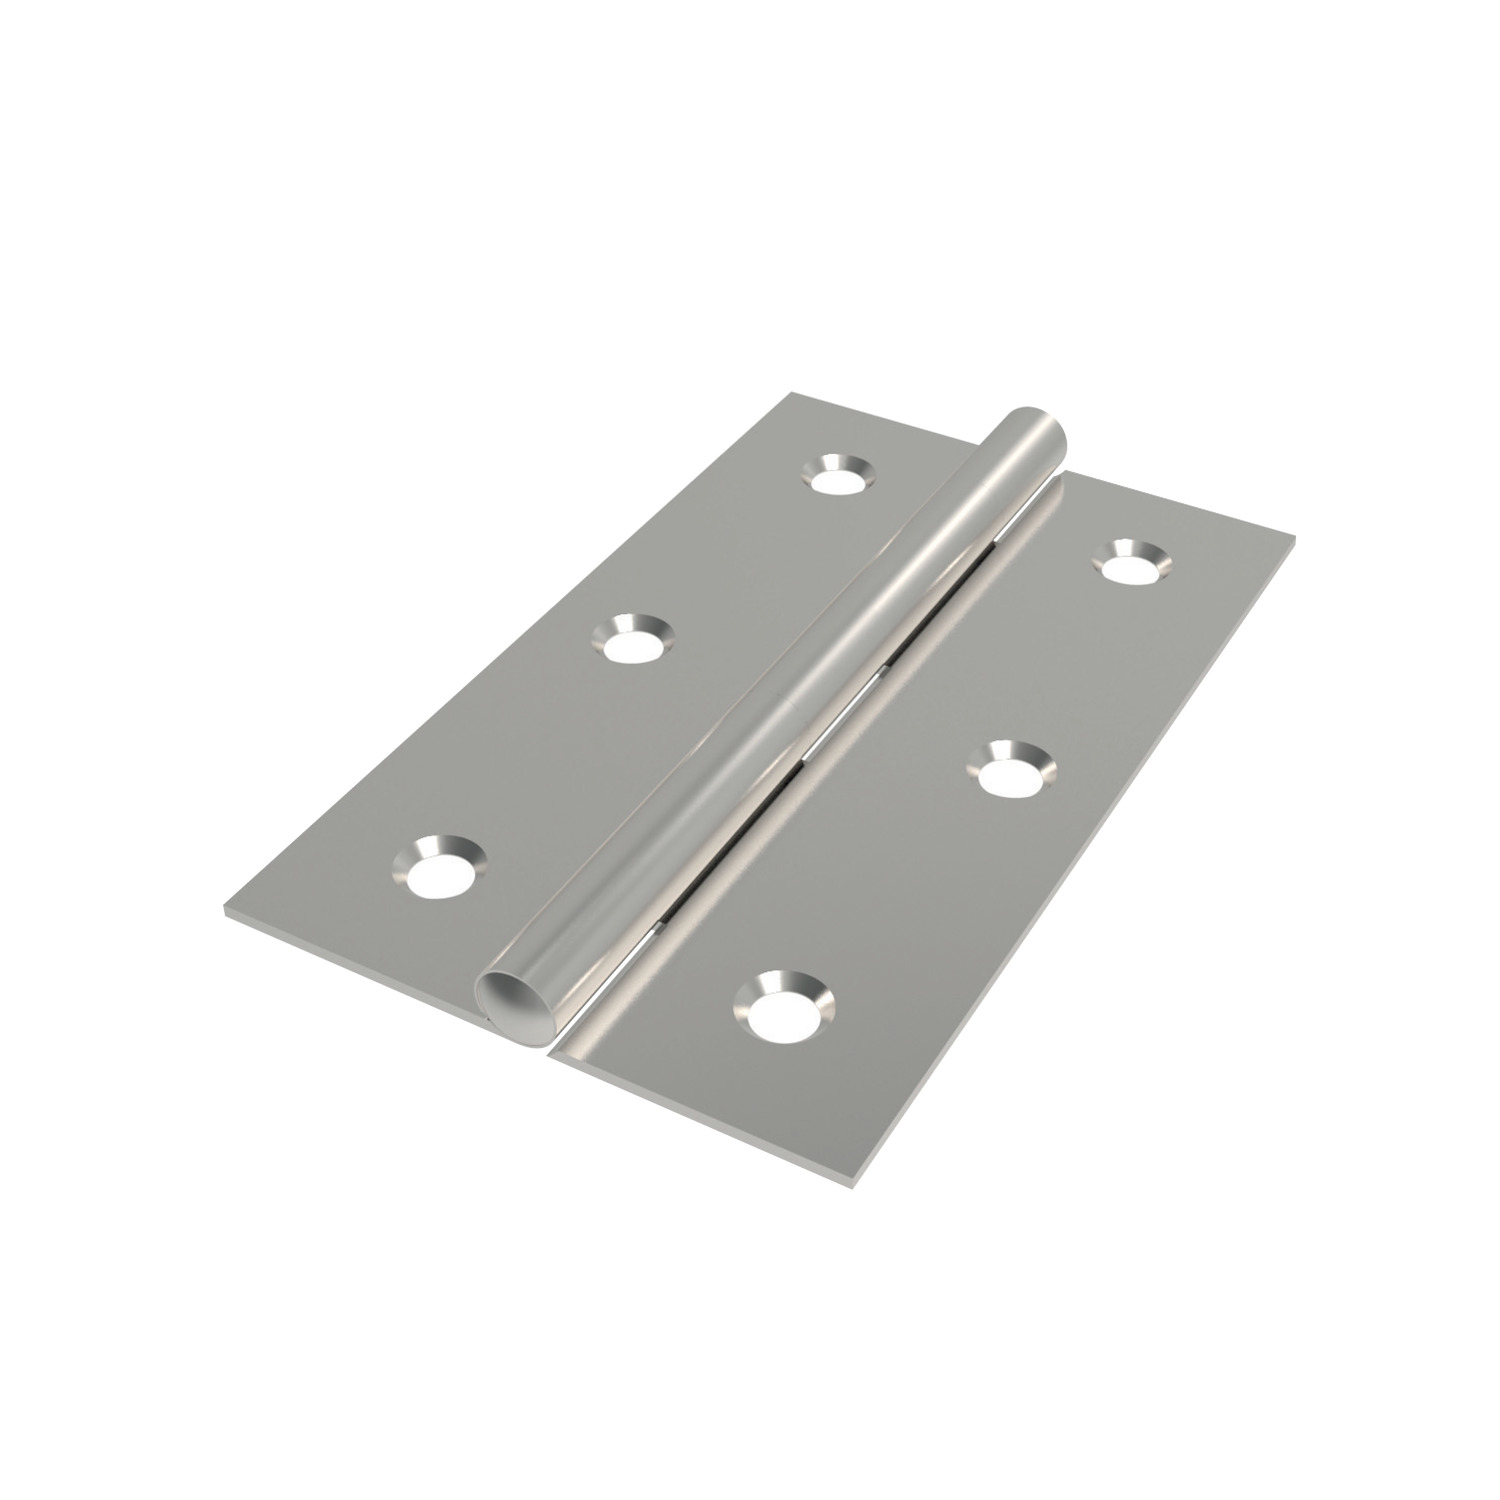 Surface Mount - Leaf Hinges Leaf hinges made from stainless steel (AISI 304) with polished finish.